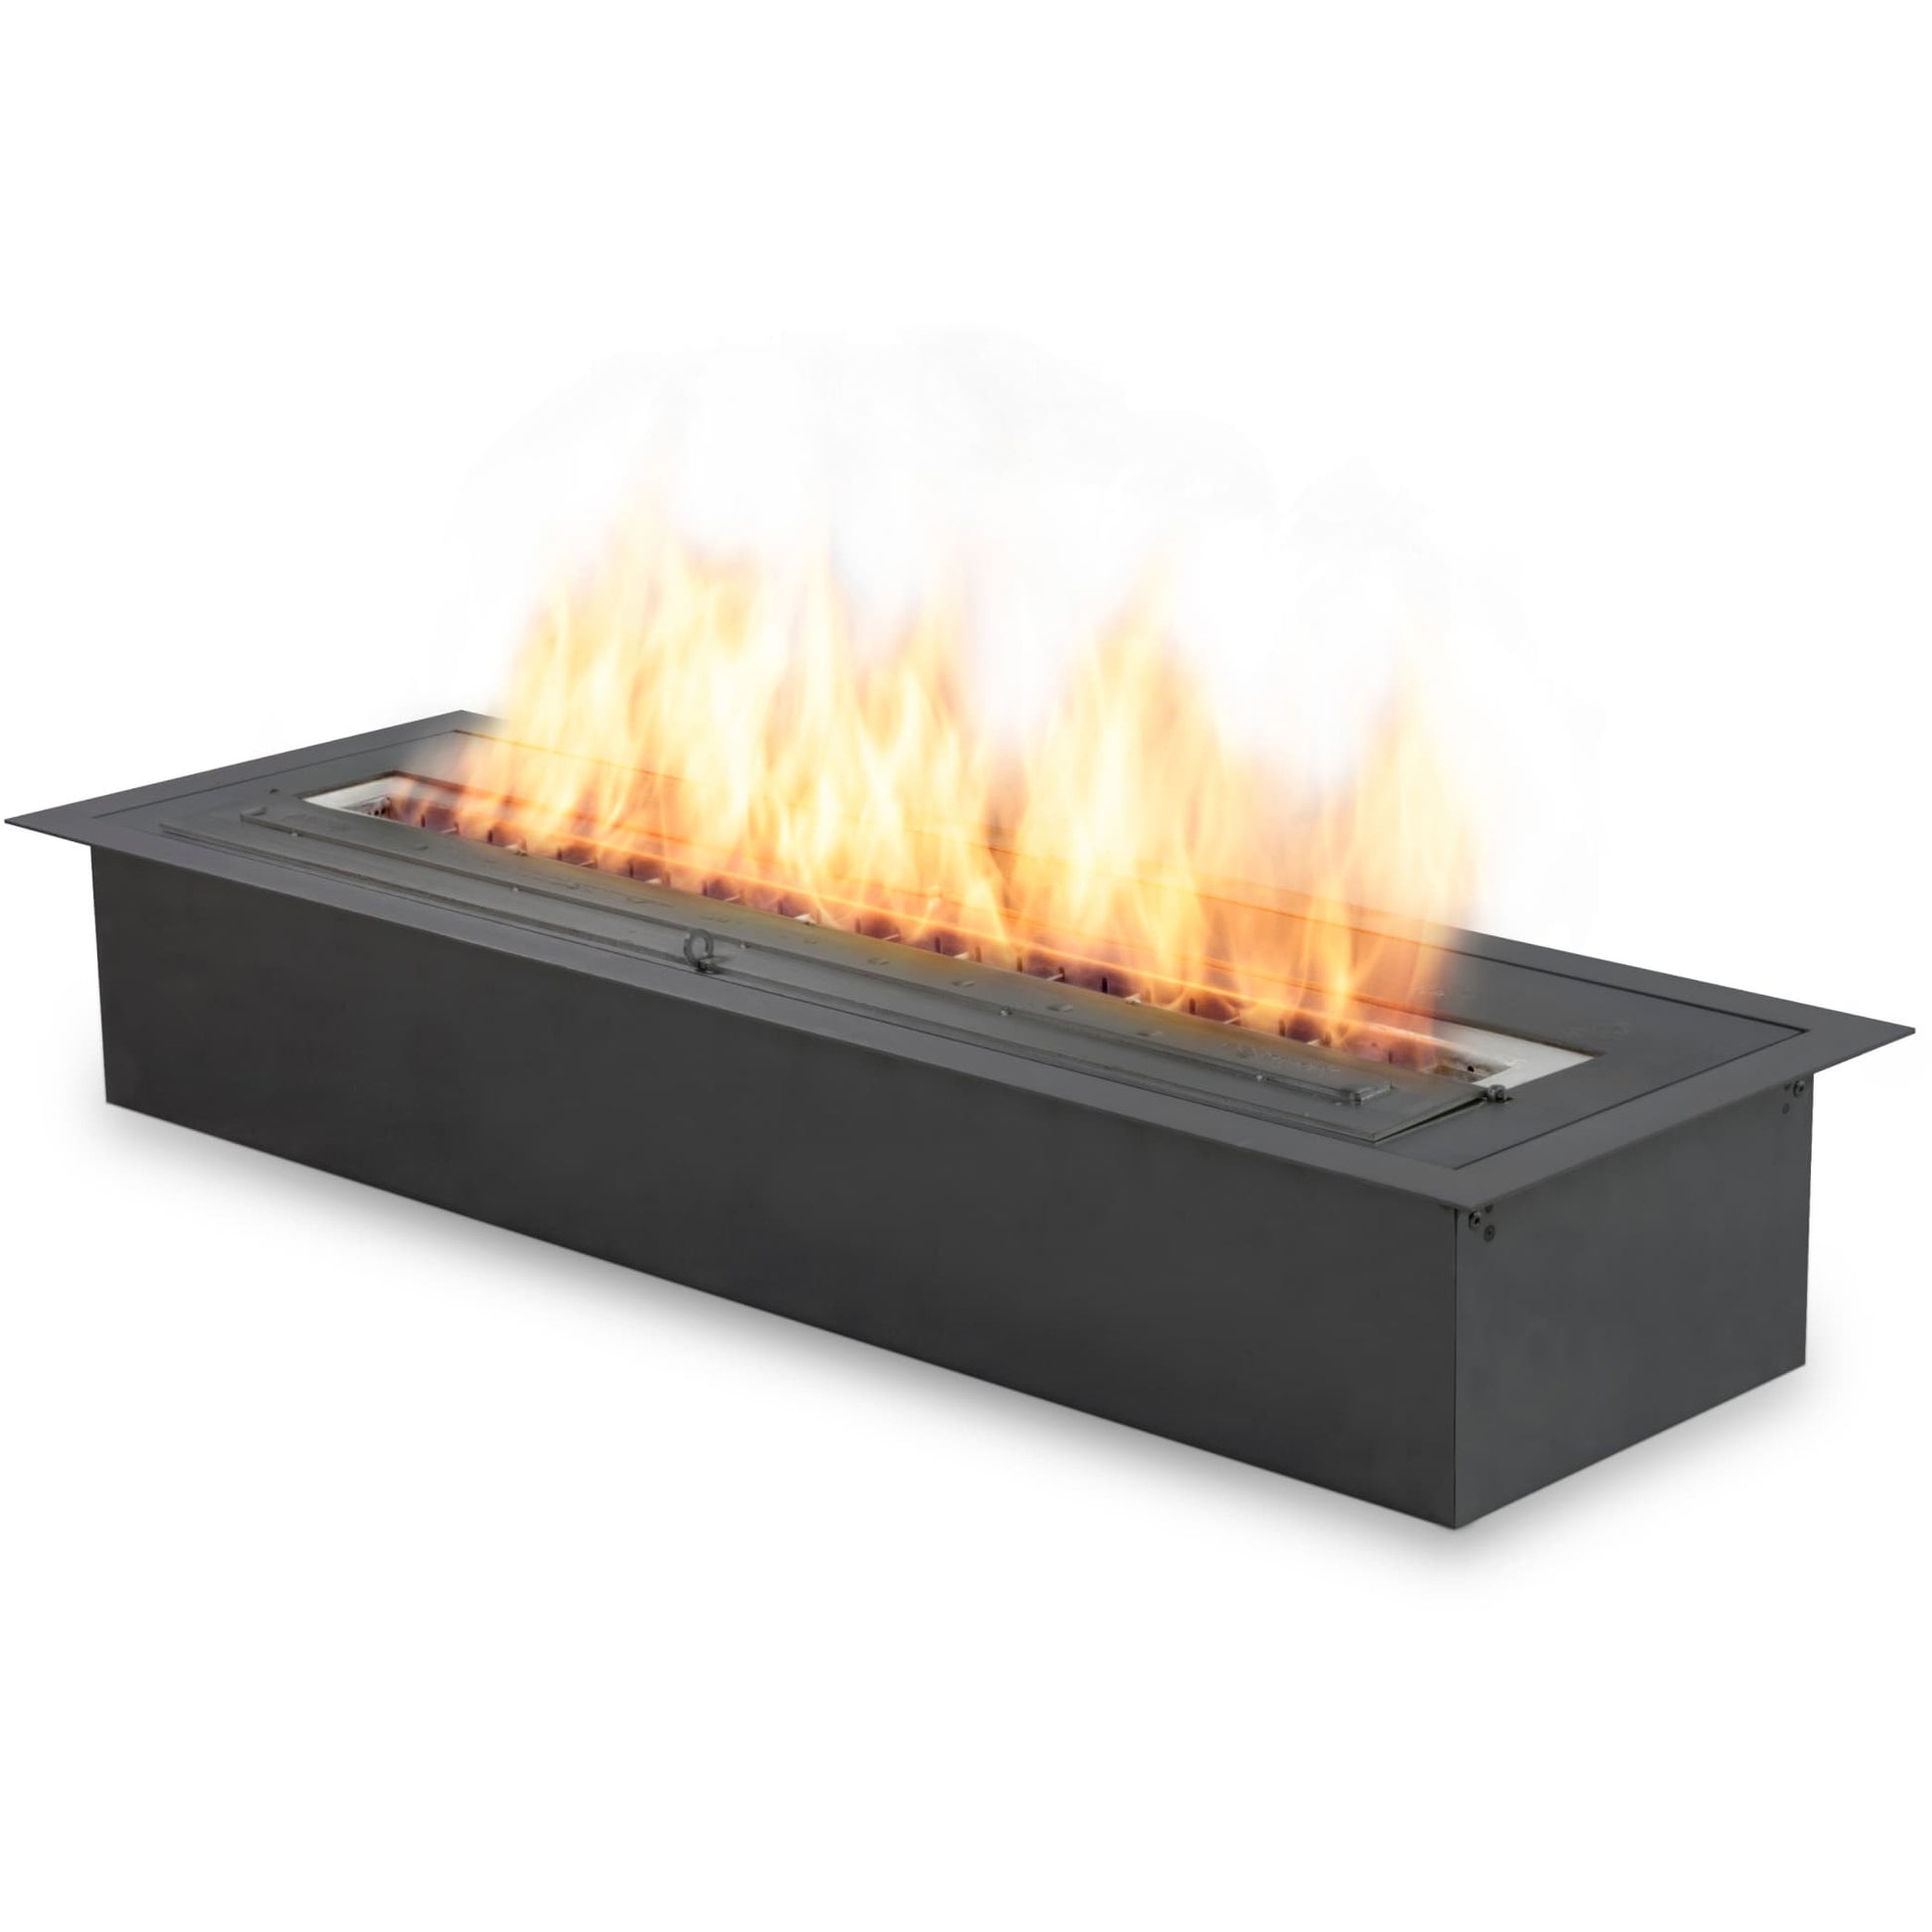 Clean burning, long, XL700 bio ethanol burner by EcoSmart Fire in black for sale. Create your own bespoke fireplace or replace an old fireplace